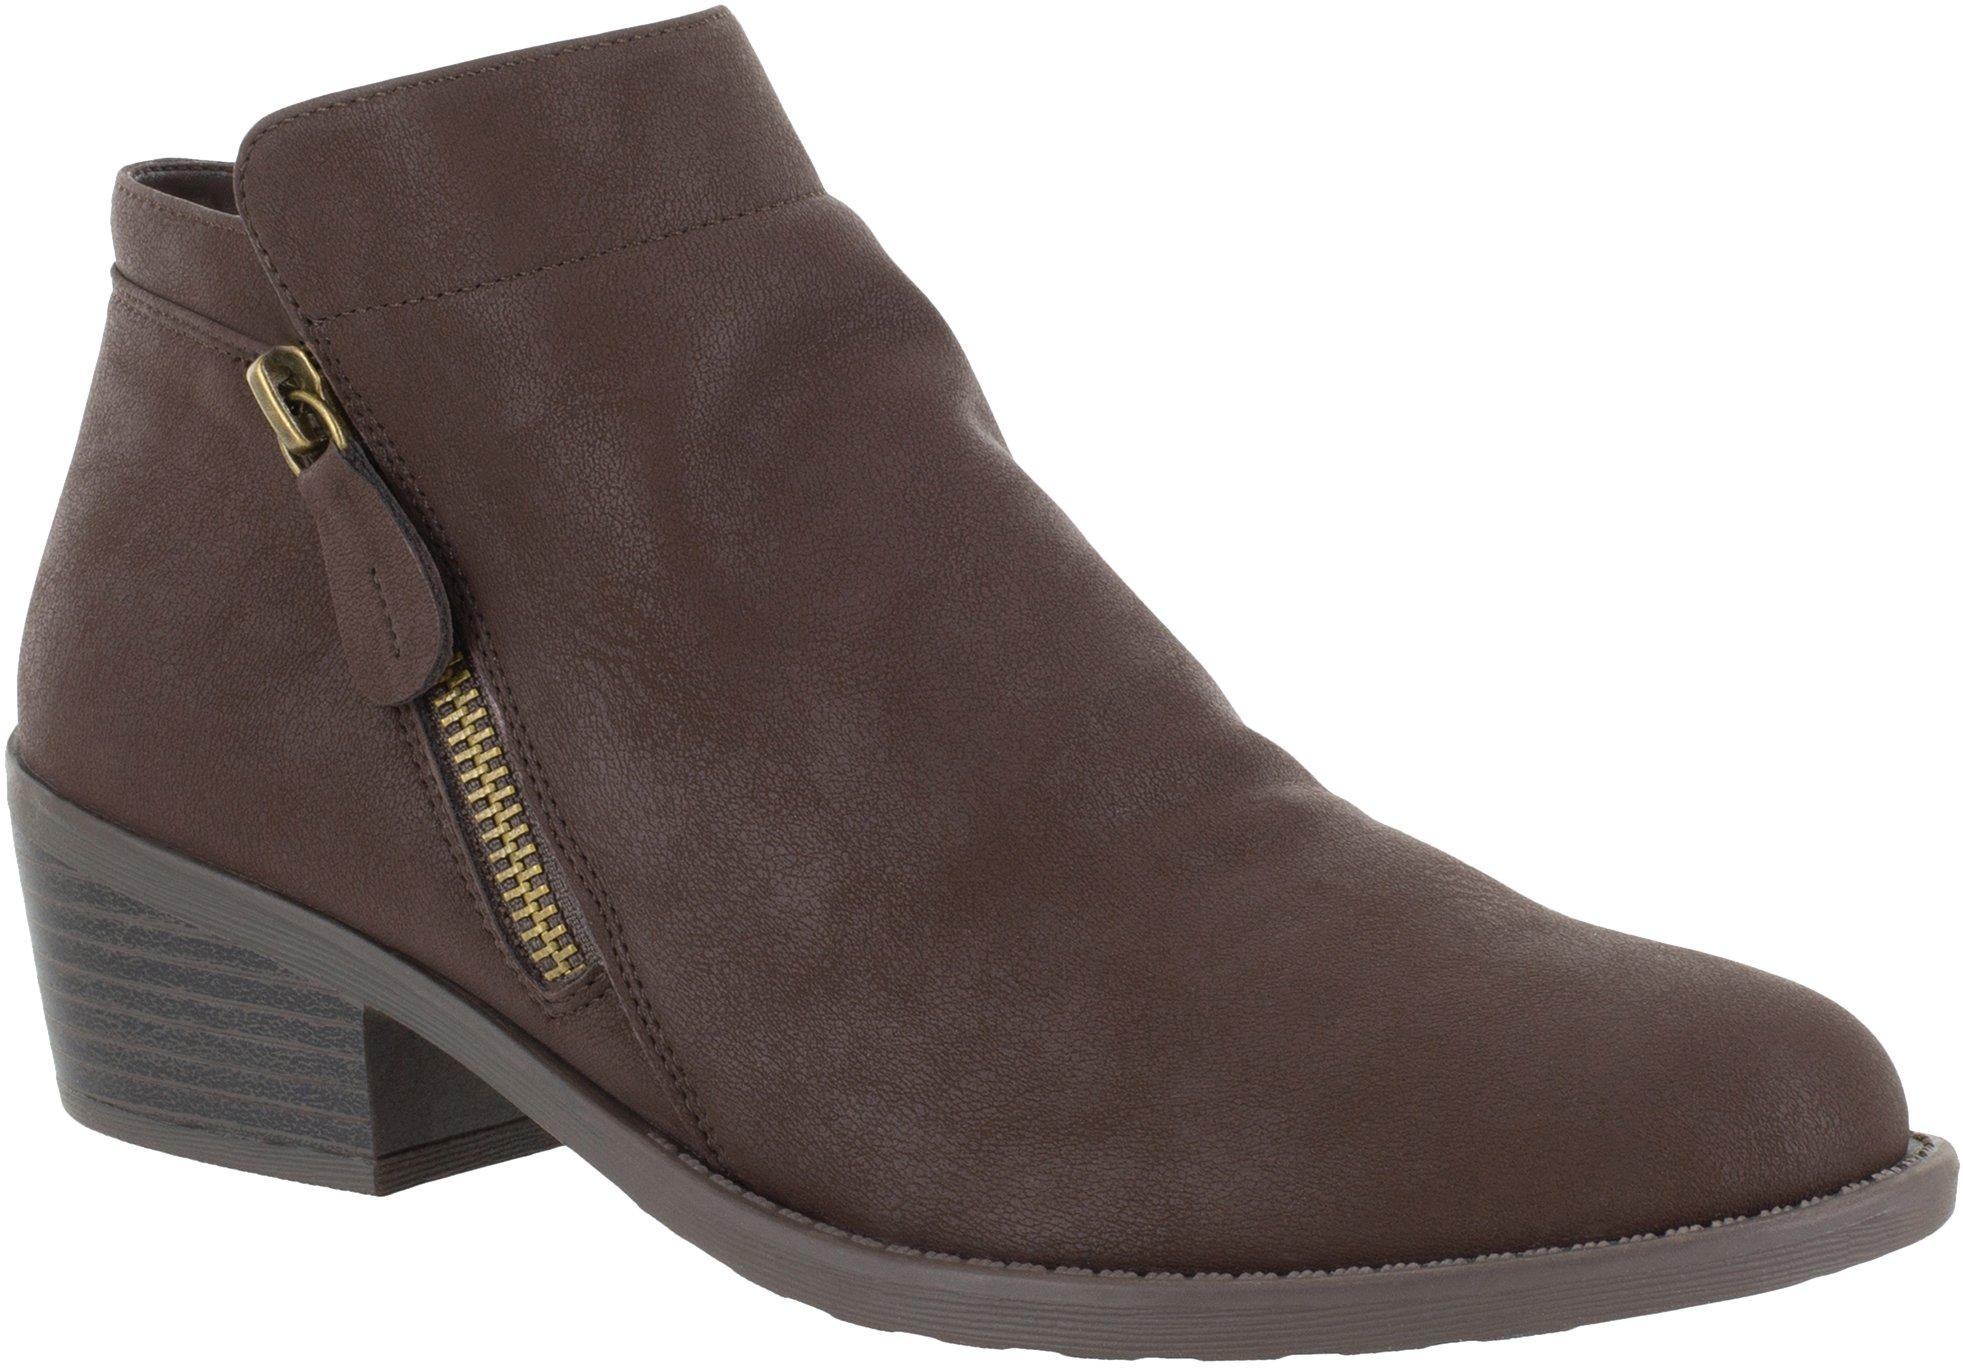 Womens Flexible Ankle Boots | Bealls 